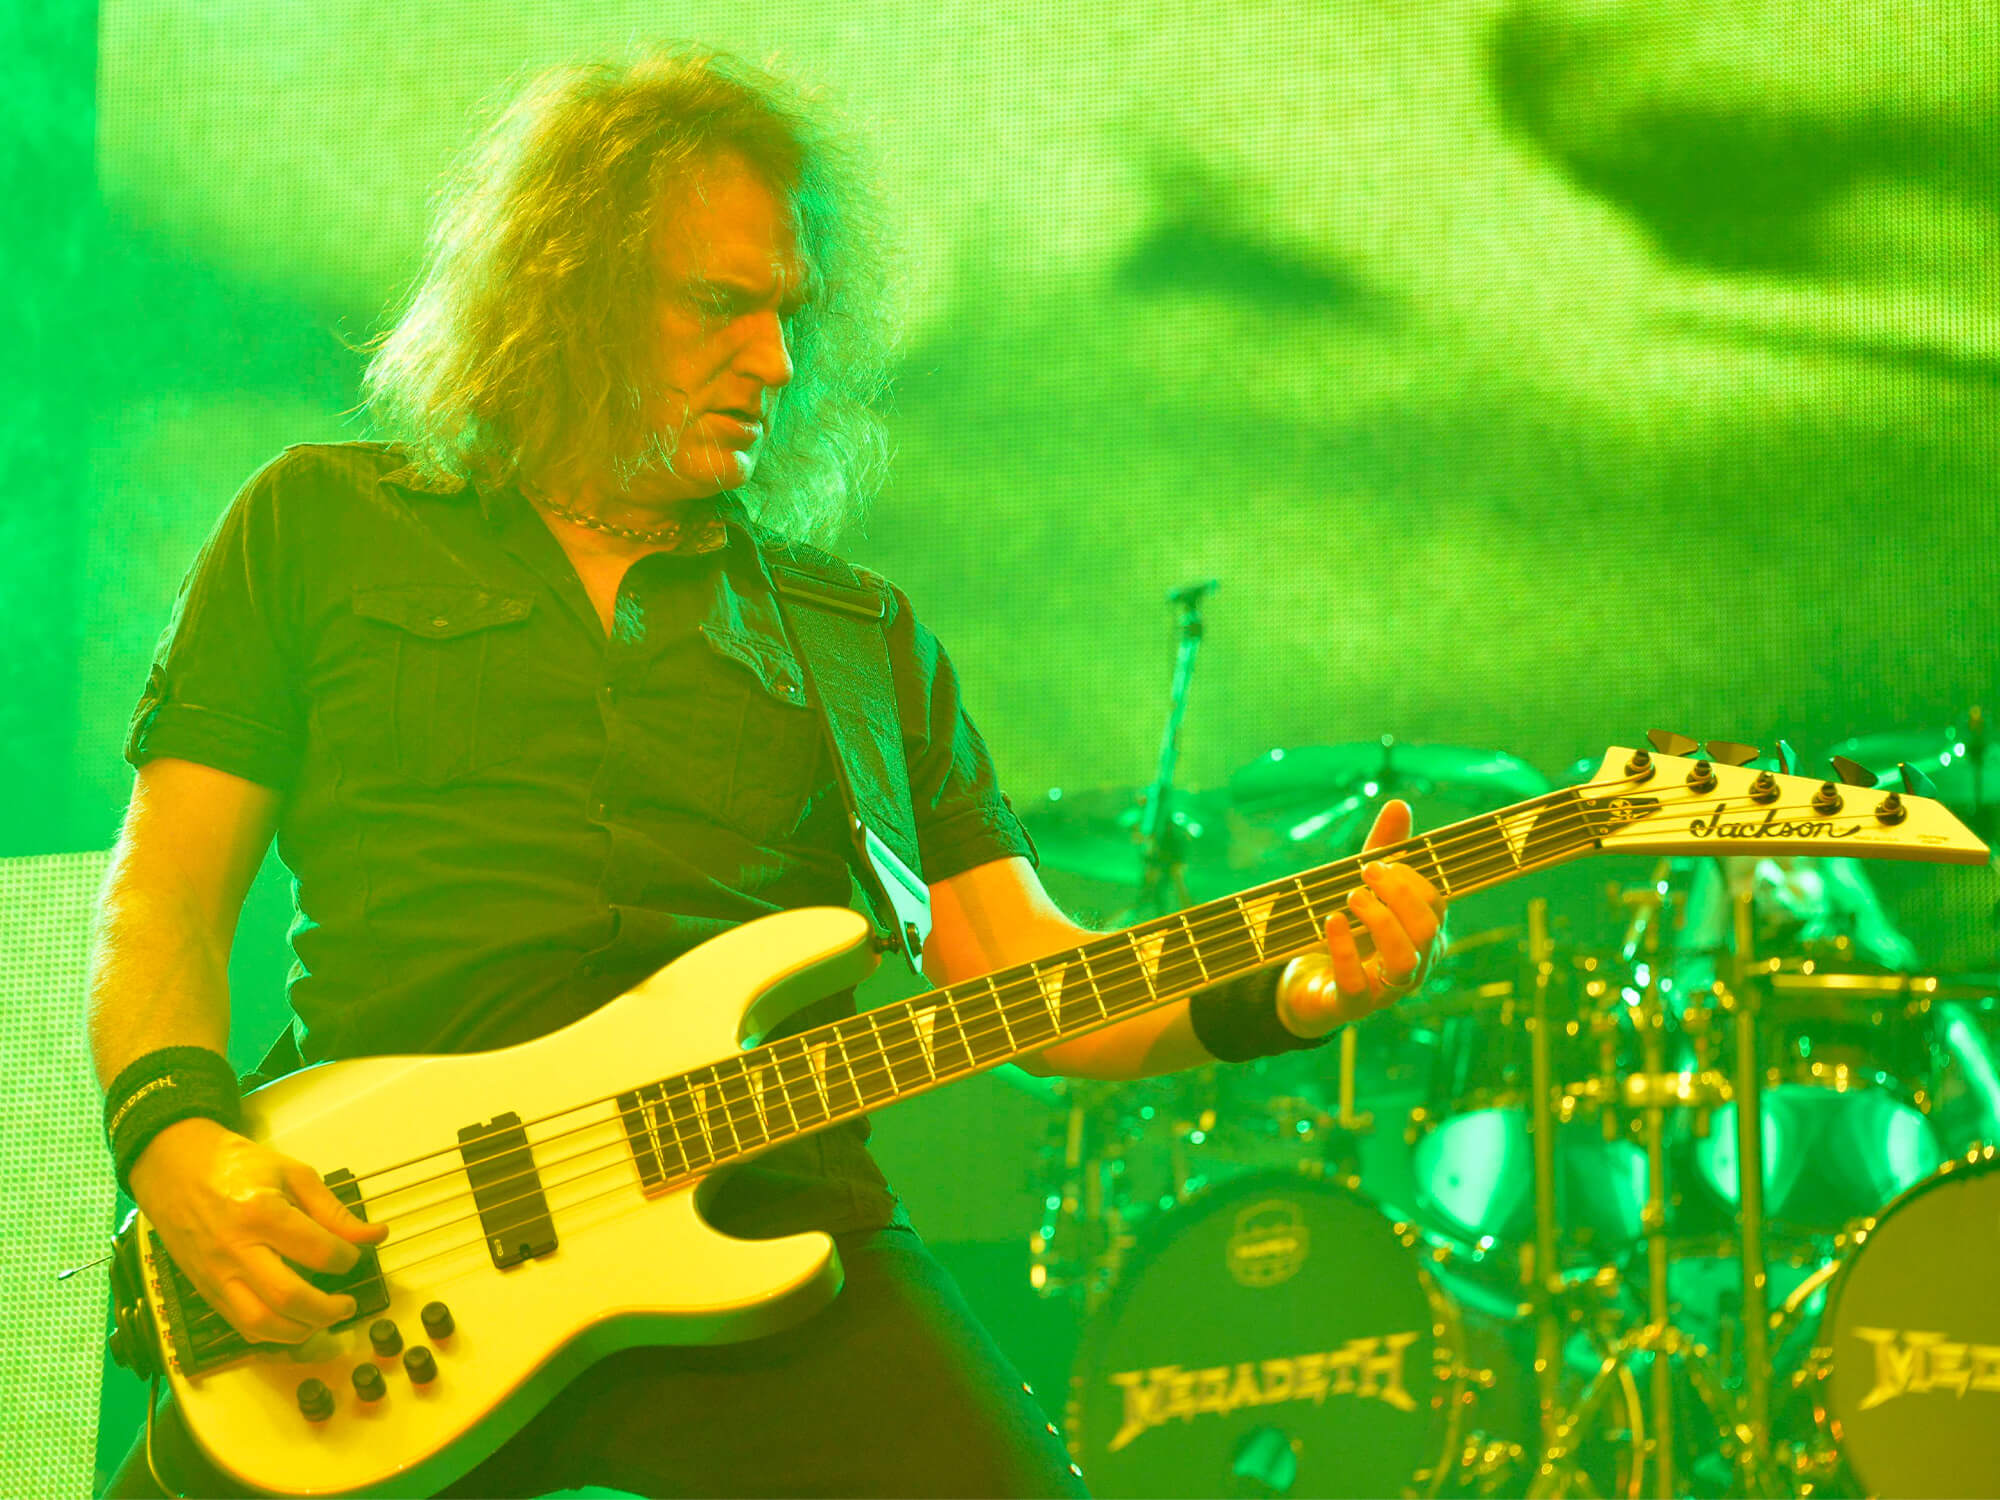 David Ellefson on stage in 2015. He plays a Jackson bass guitar and stands under green lighting.